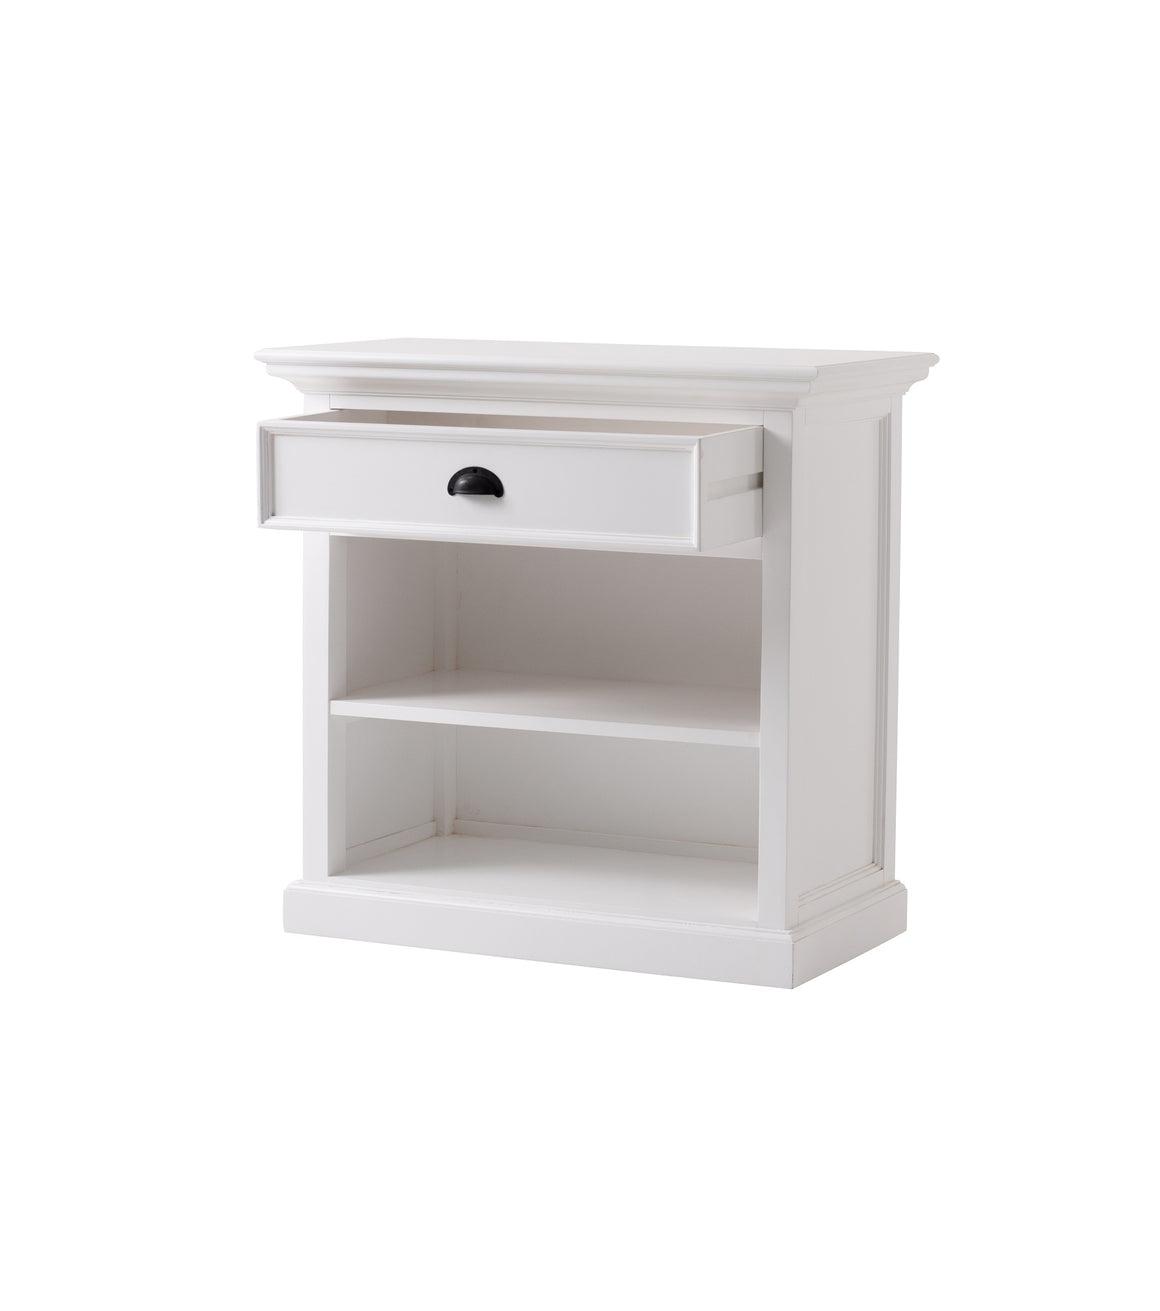 Halifax grand T764L Bedside Table With Shelves